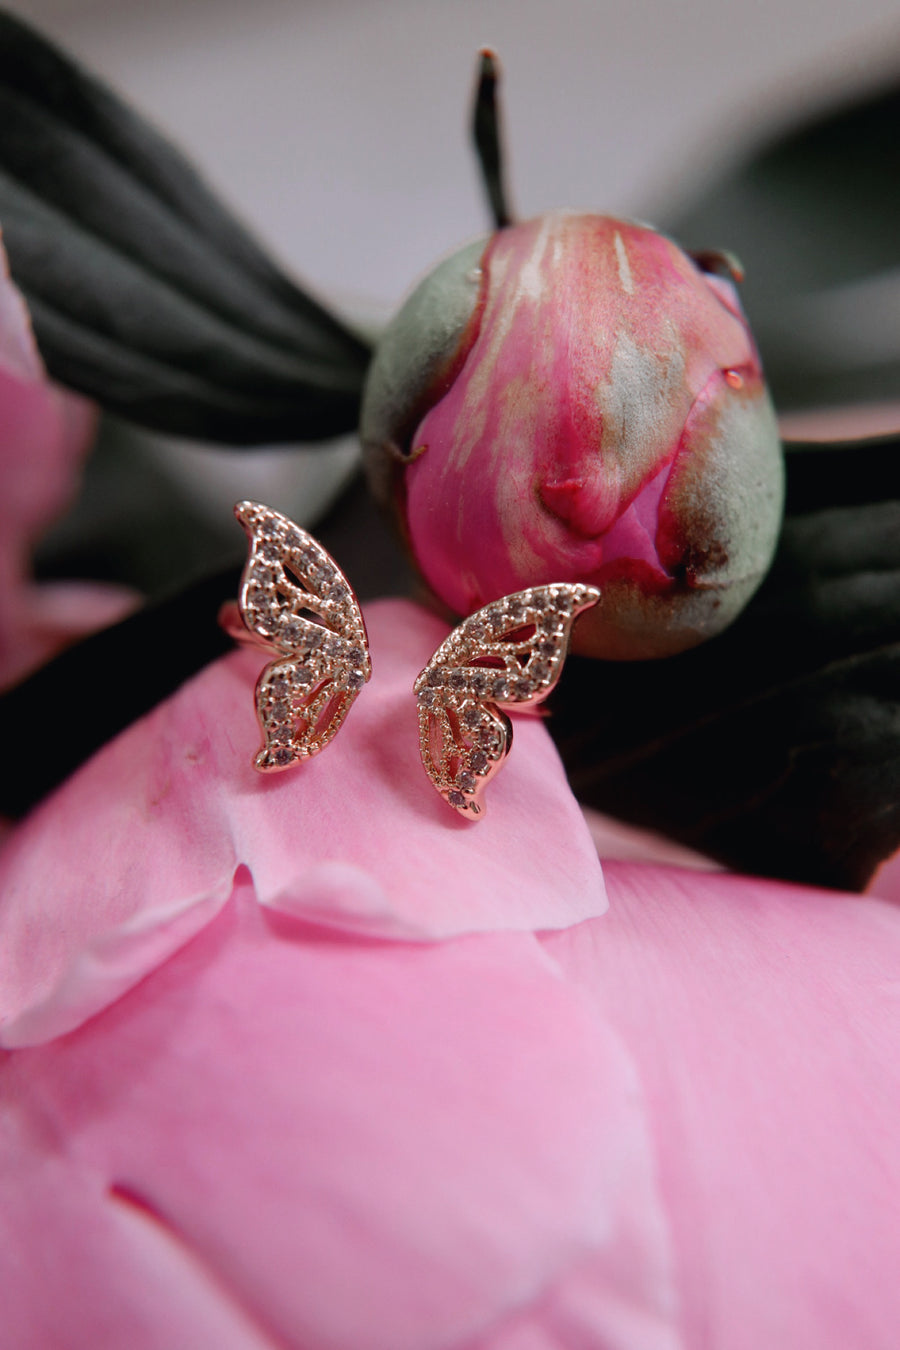 Mariposa | butterfly ring